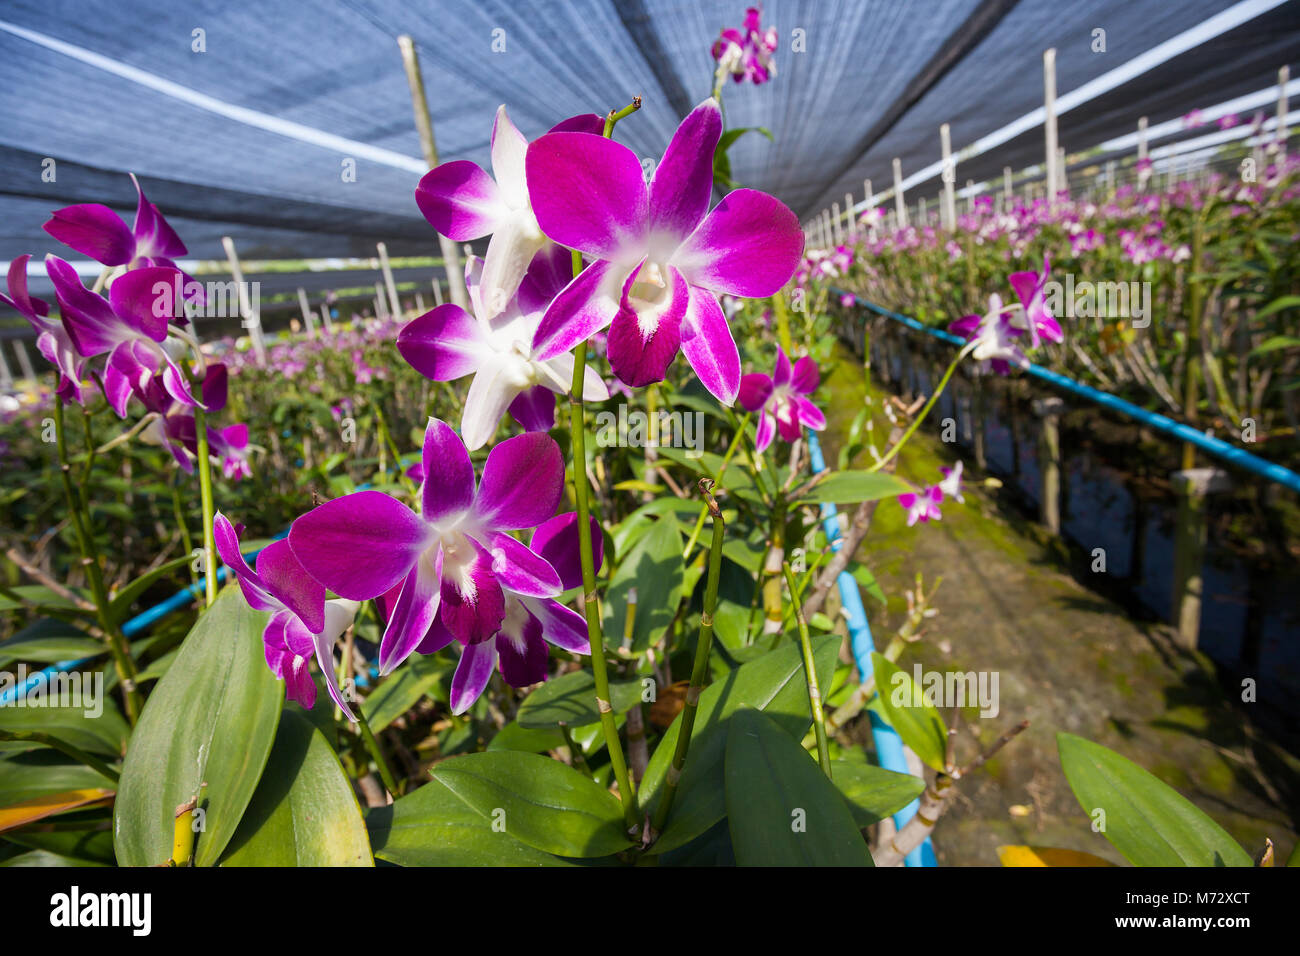 Orchid flowers blooming in orchid farm. Stock Photo